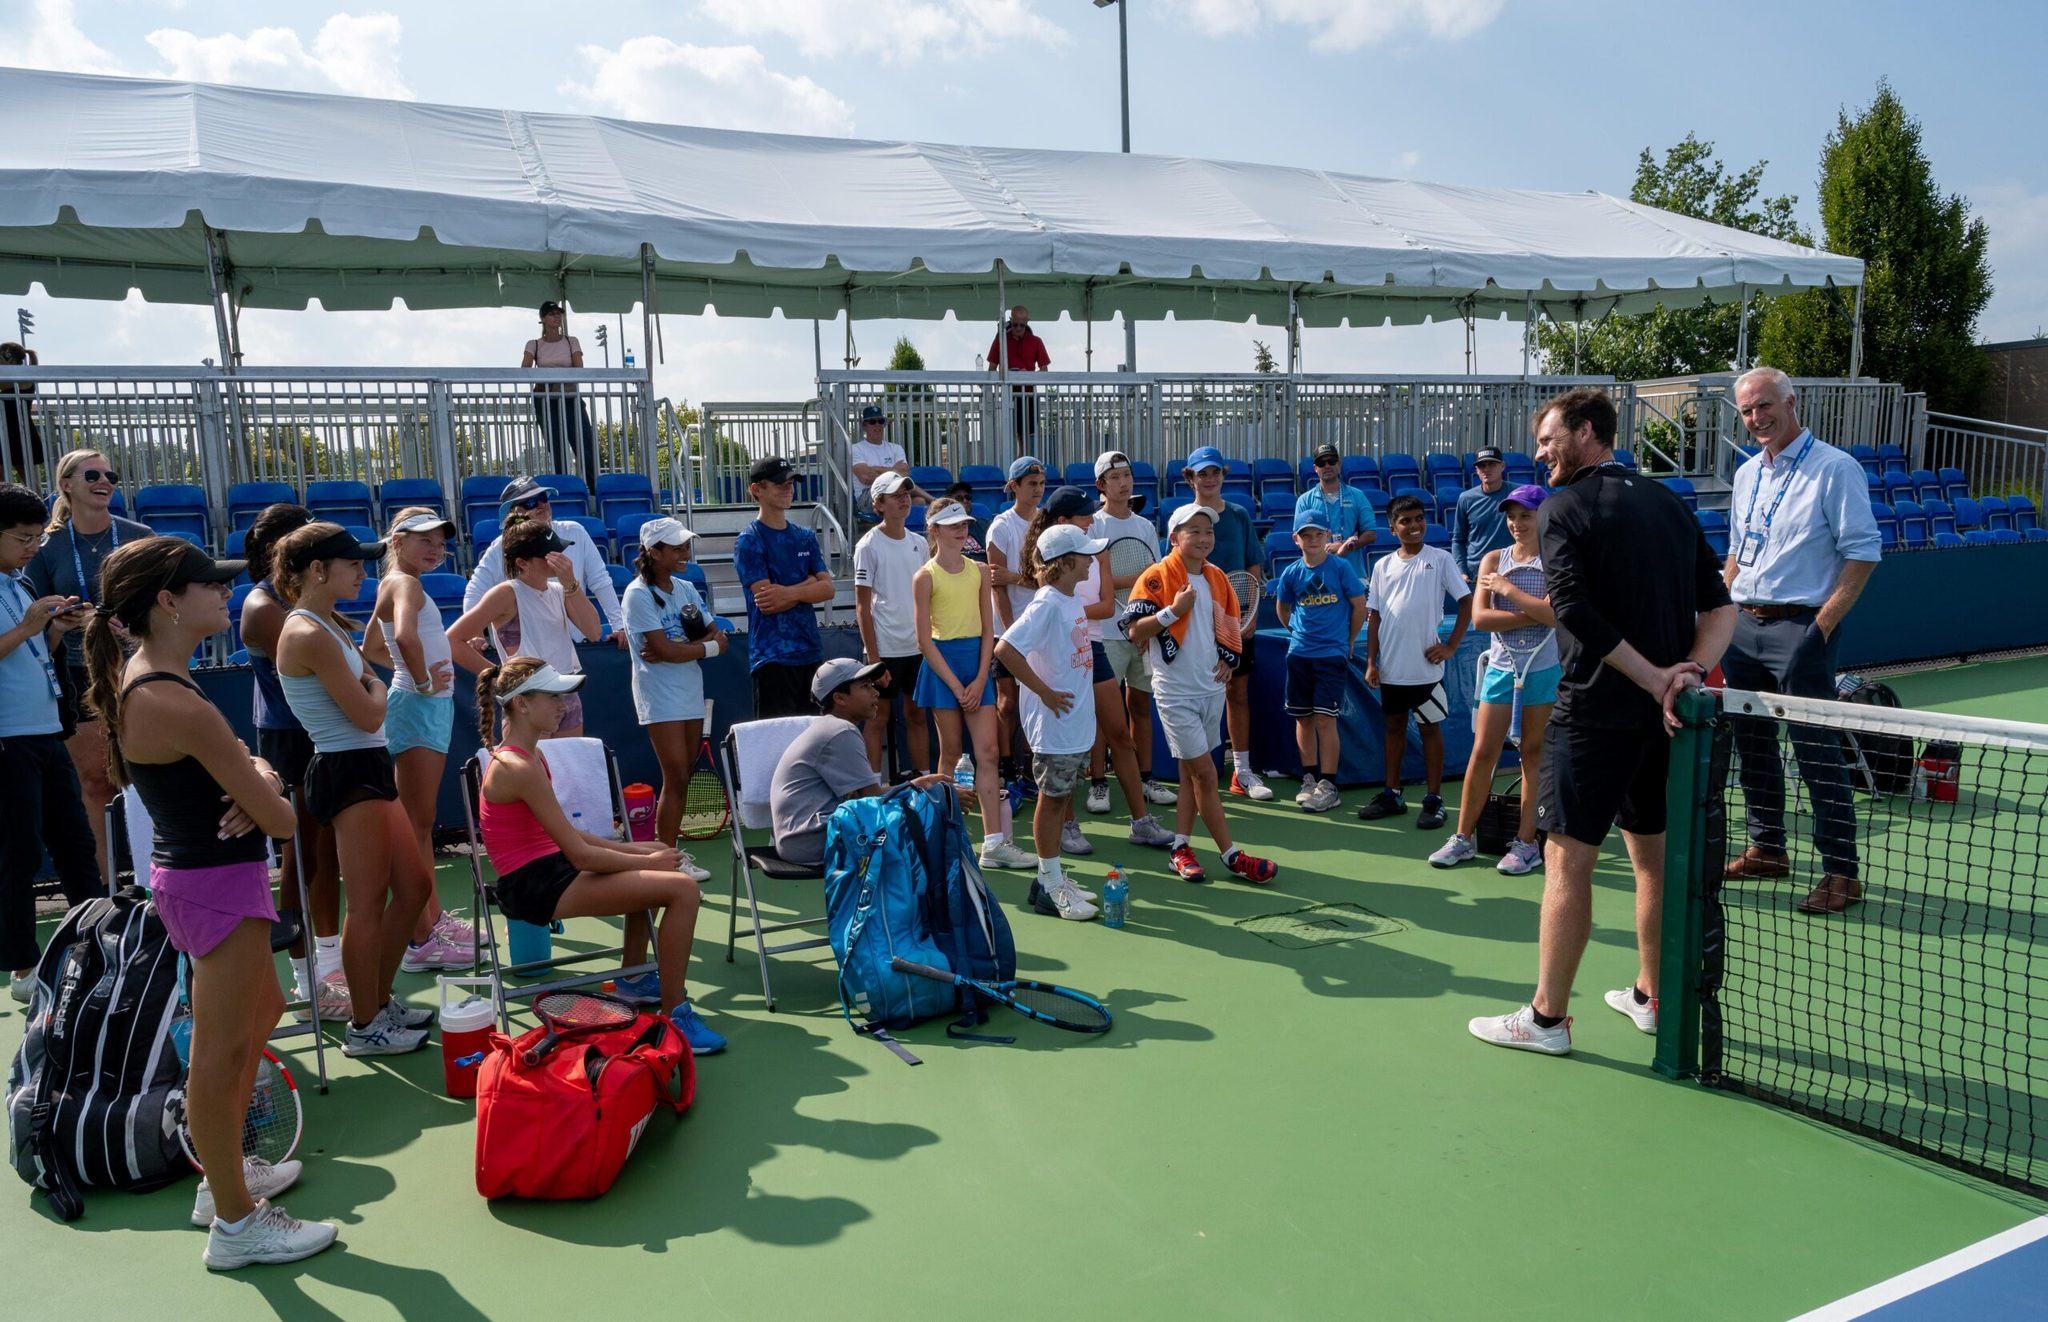 Todd Martin and Michael Venus talk to a group of kids